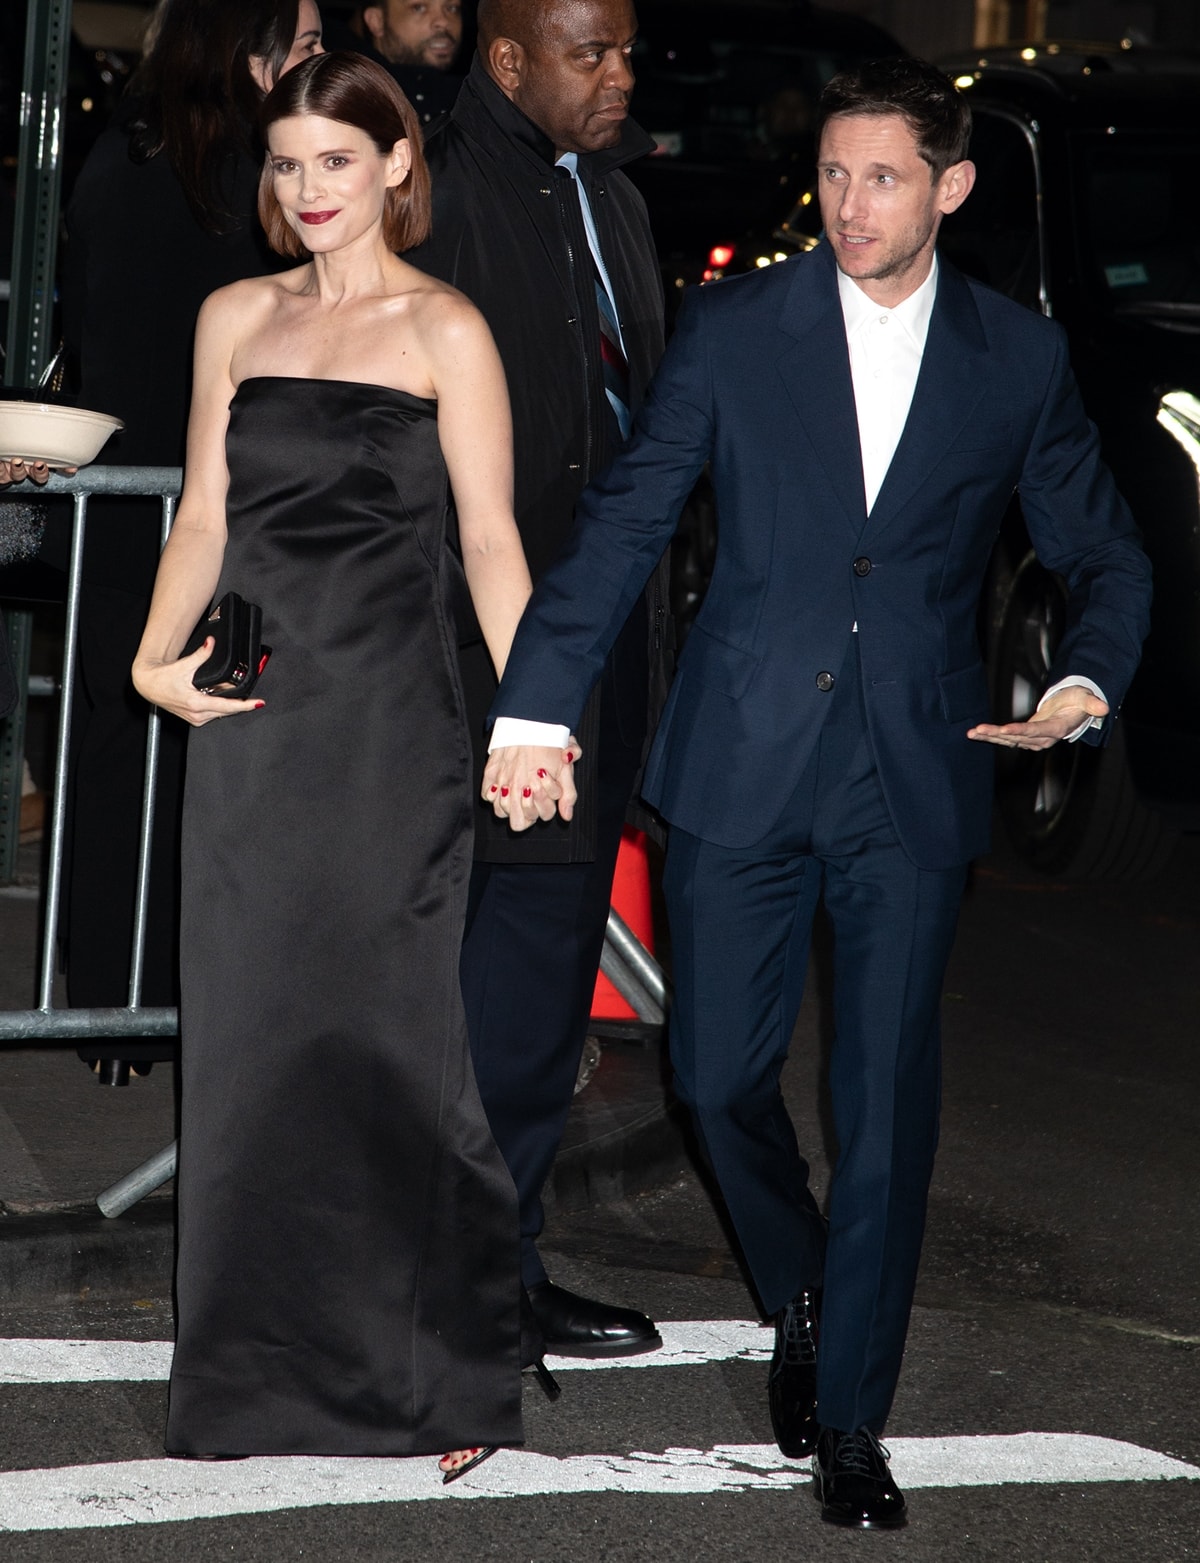 Jamie Bell, with a height of 5 feet 7 inches (170.2 cm), and Kate Mara, who stands at 5 feet 2 inches (157.5 cm), arrive for The 2023 Gotham Awards